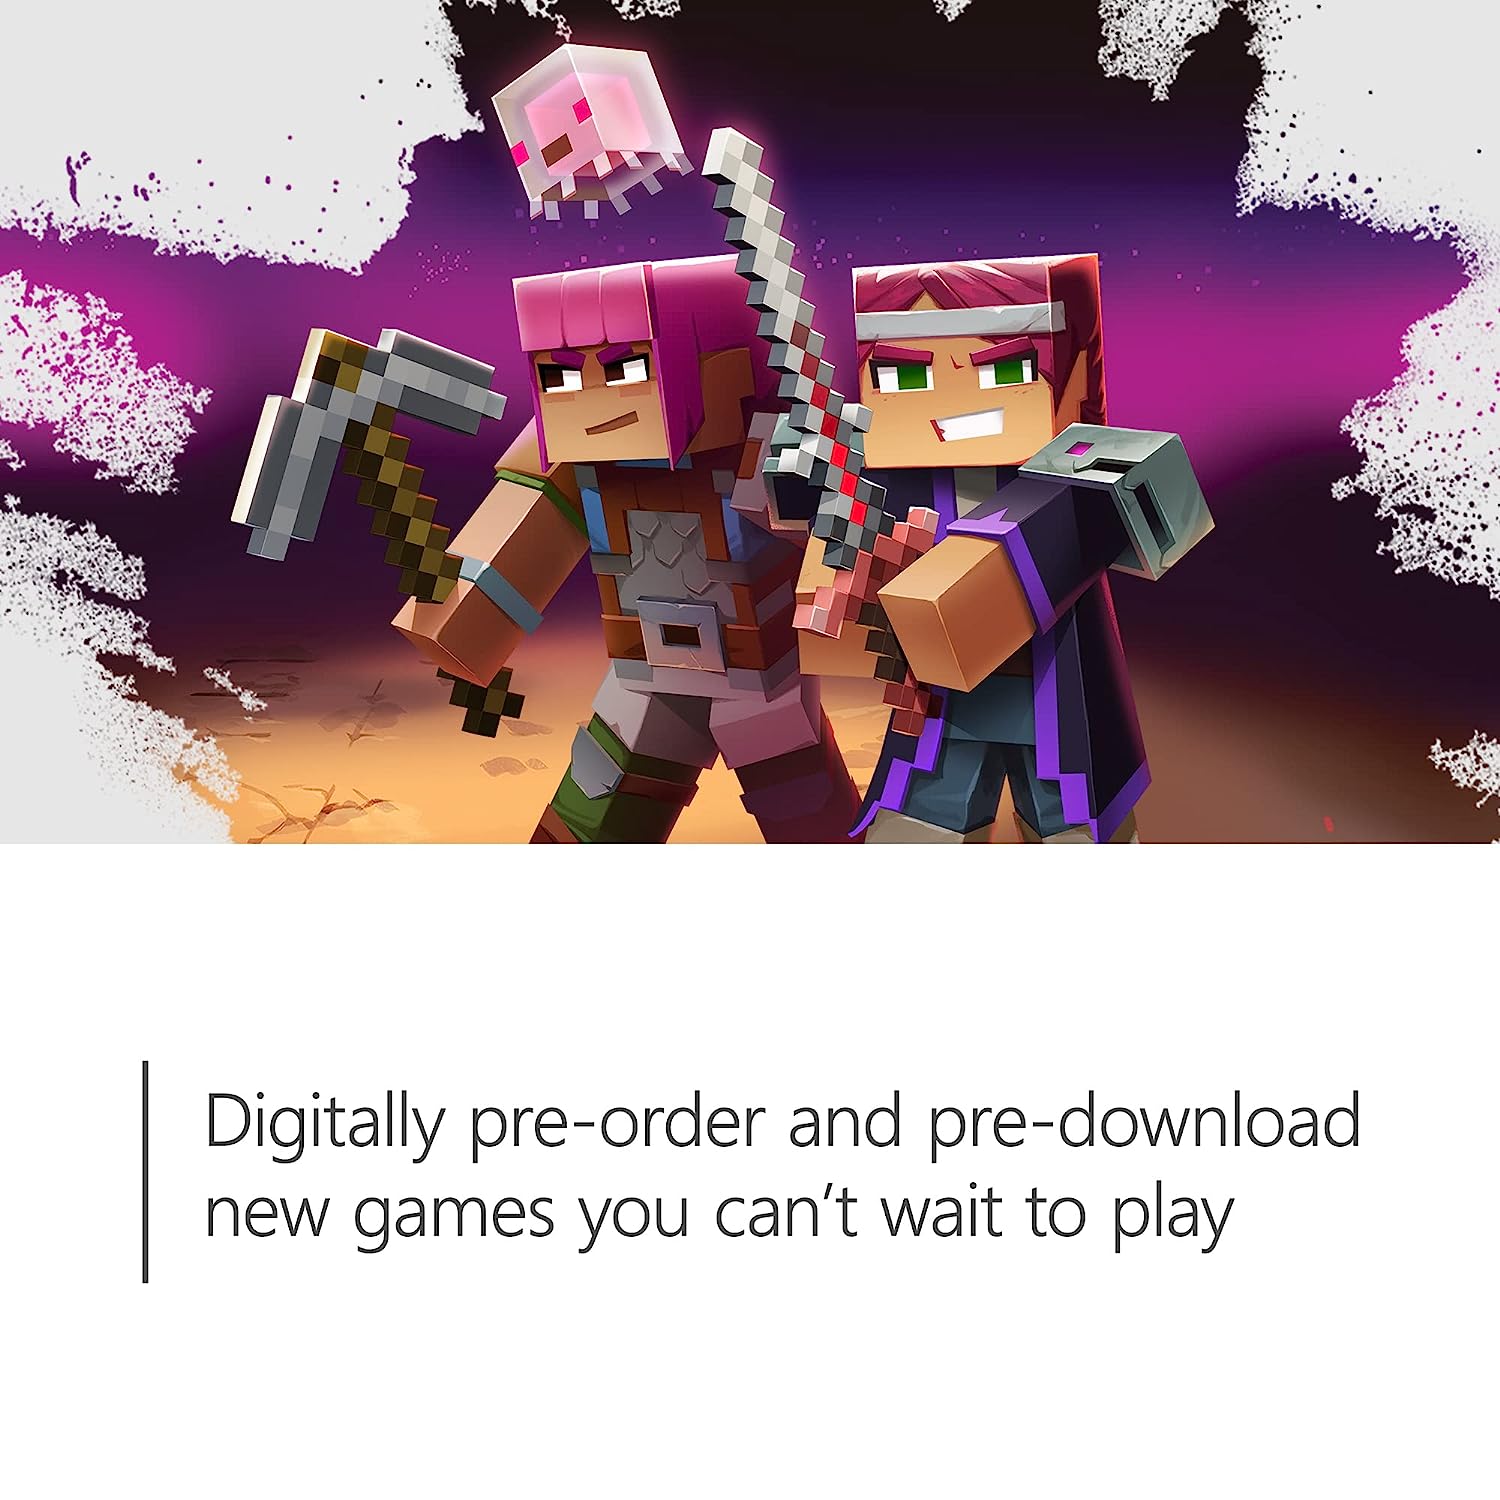 $20 Xbox Digital Gift Card | Digitally pre-order and pre-download new games you can't wait to play.